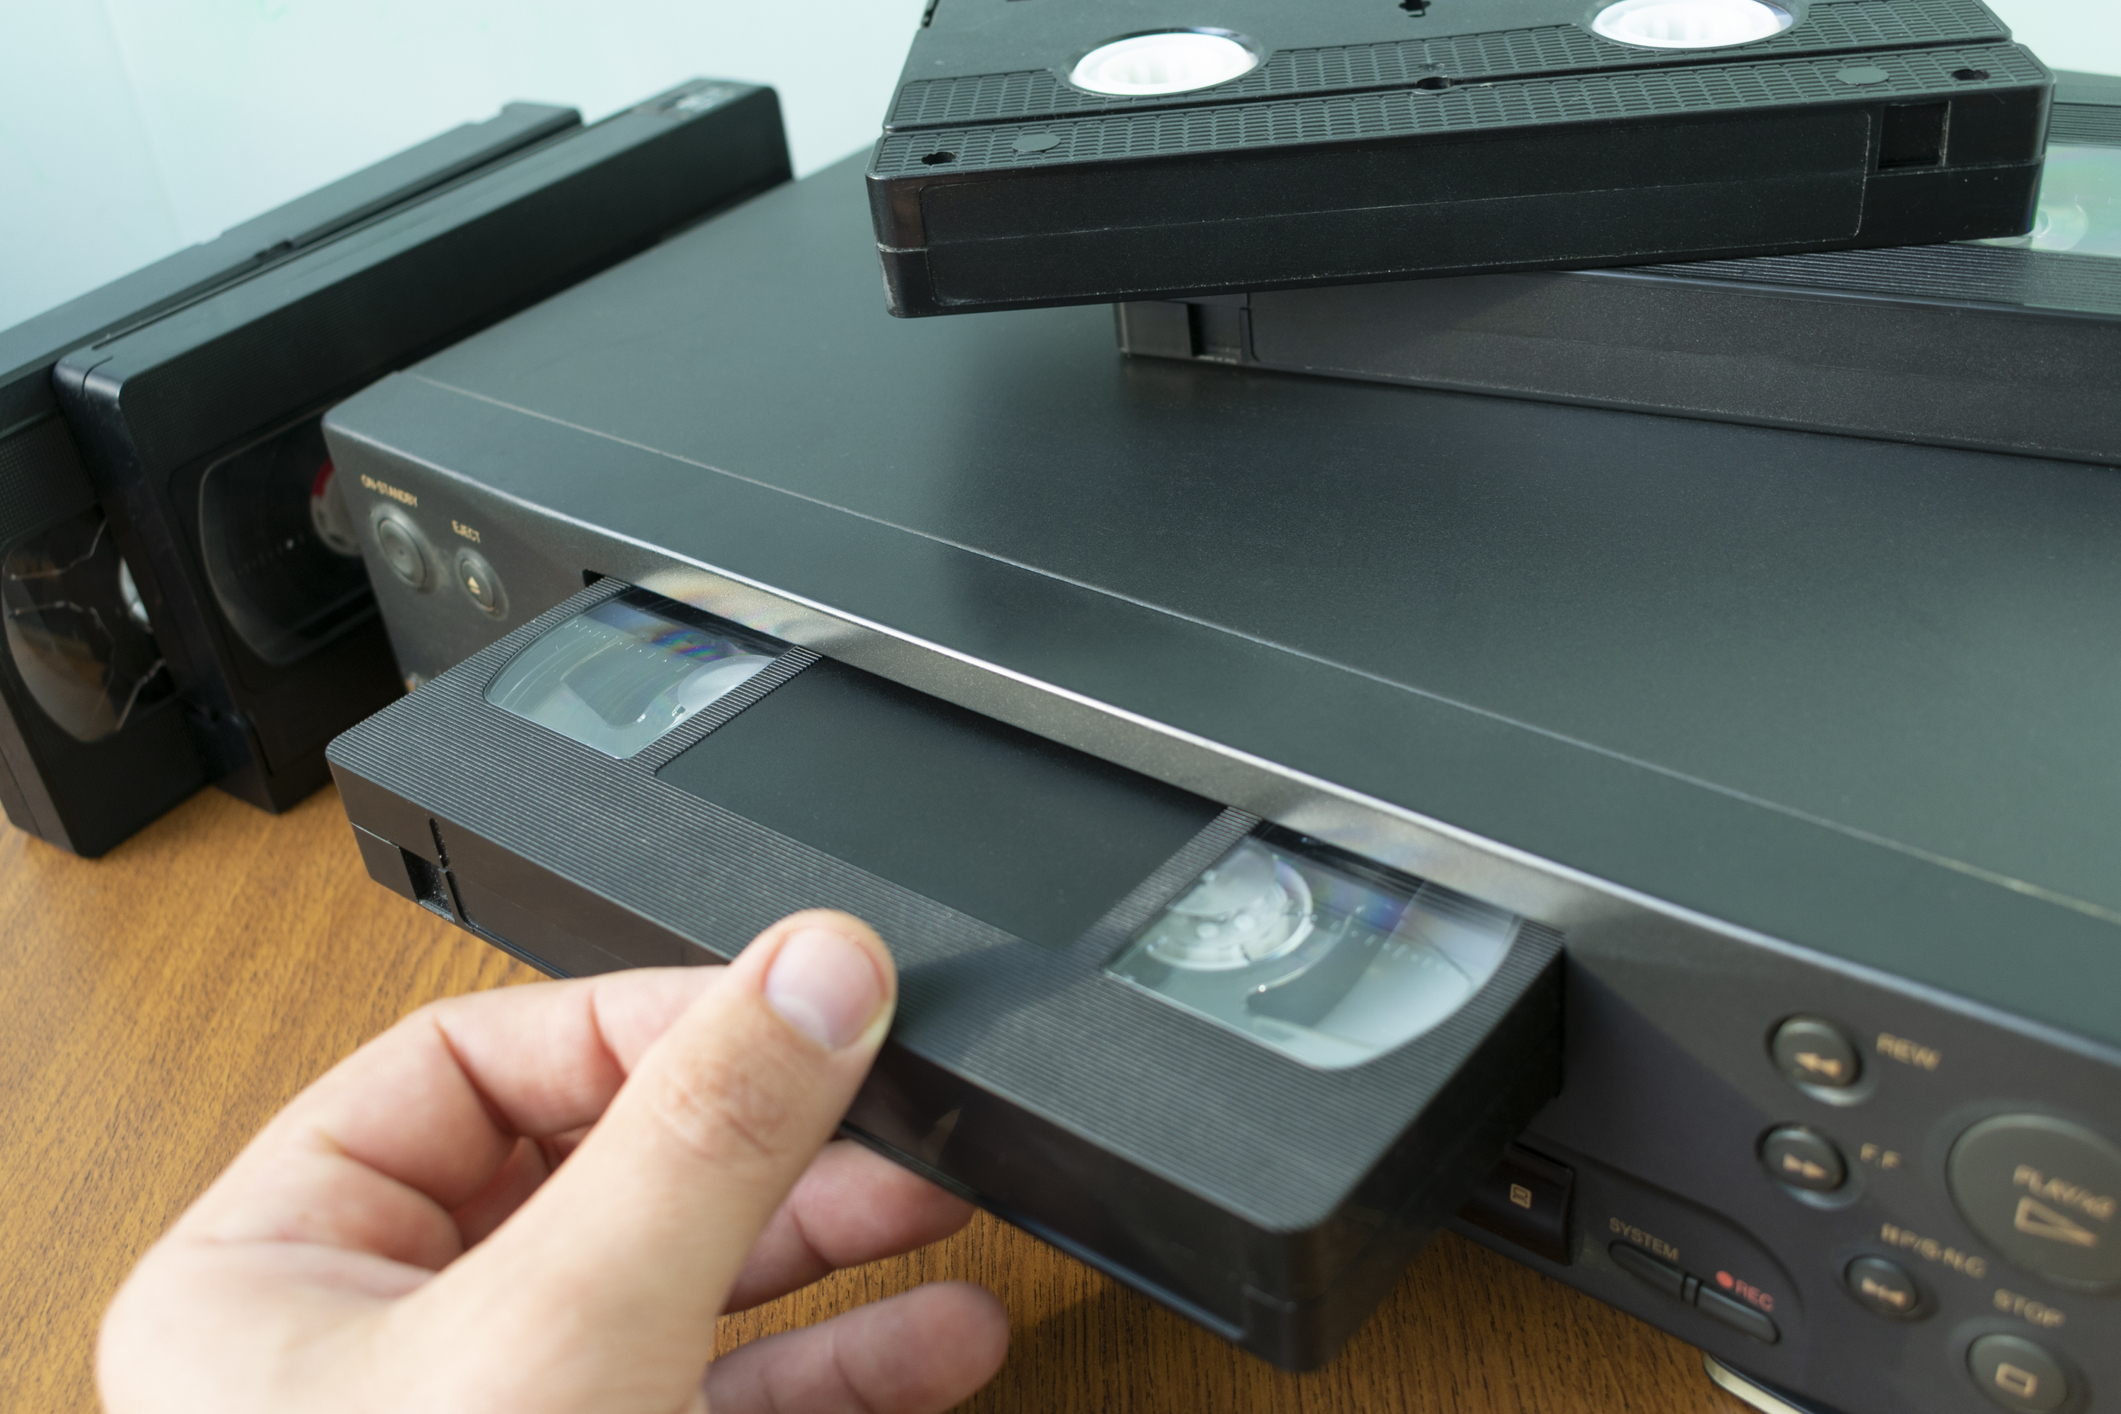 Someone putting a VHS into the VCR